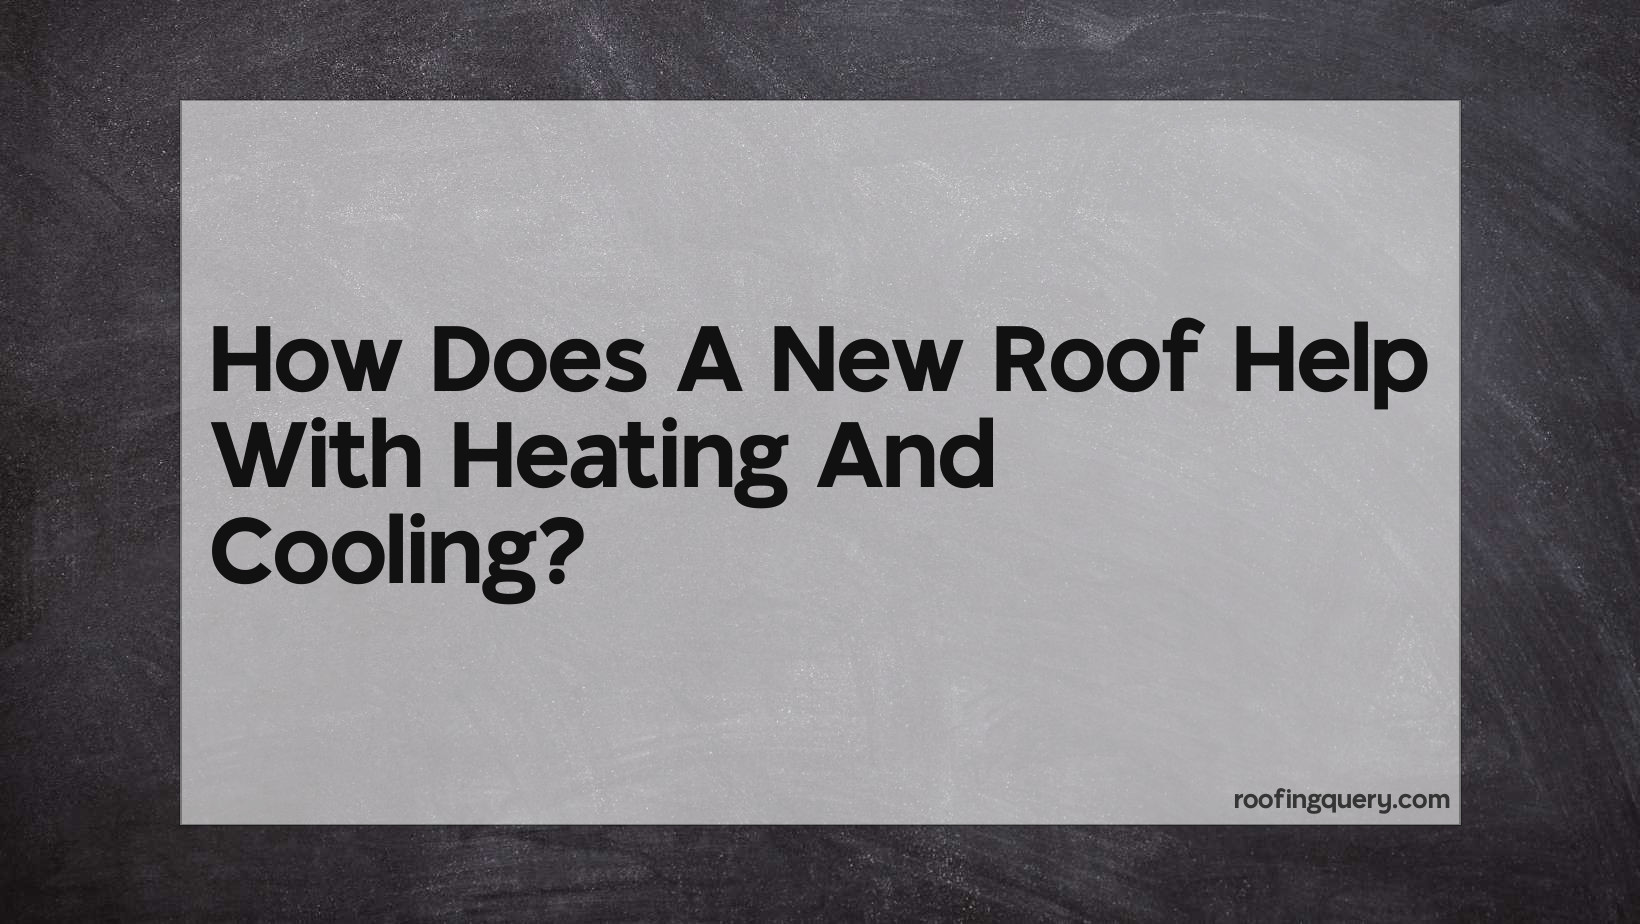 How Does A New Roof Help With Heating And Cooling?